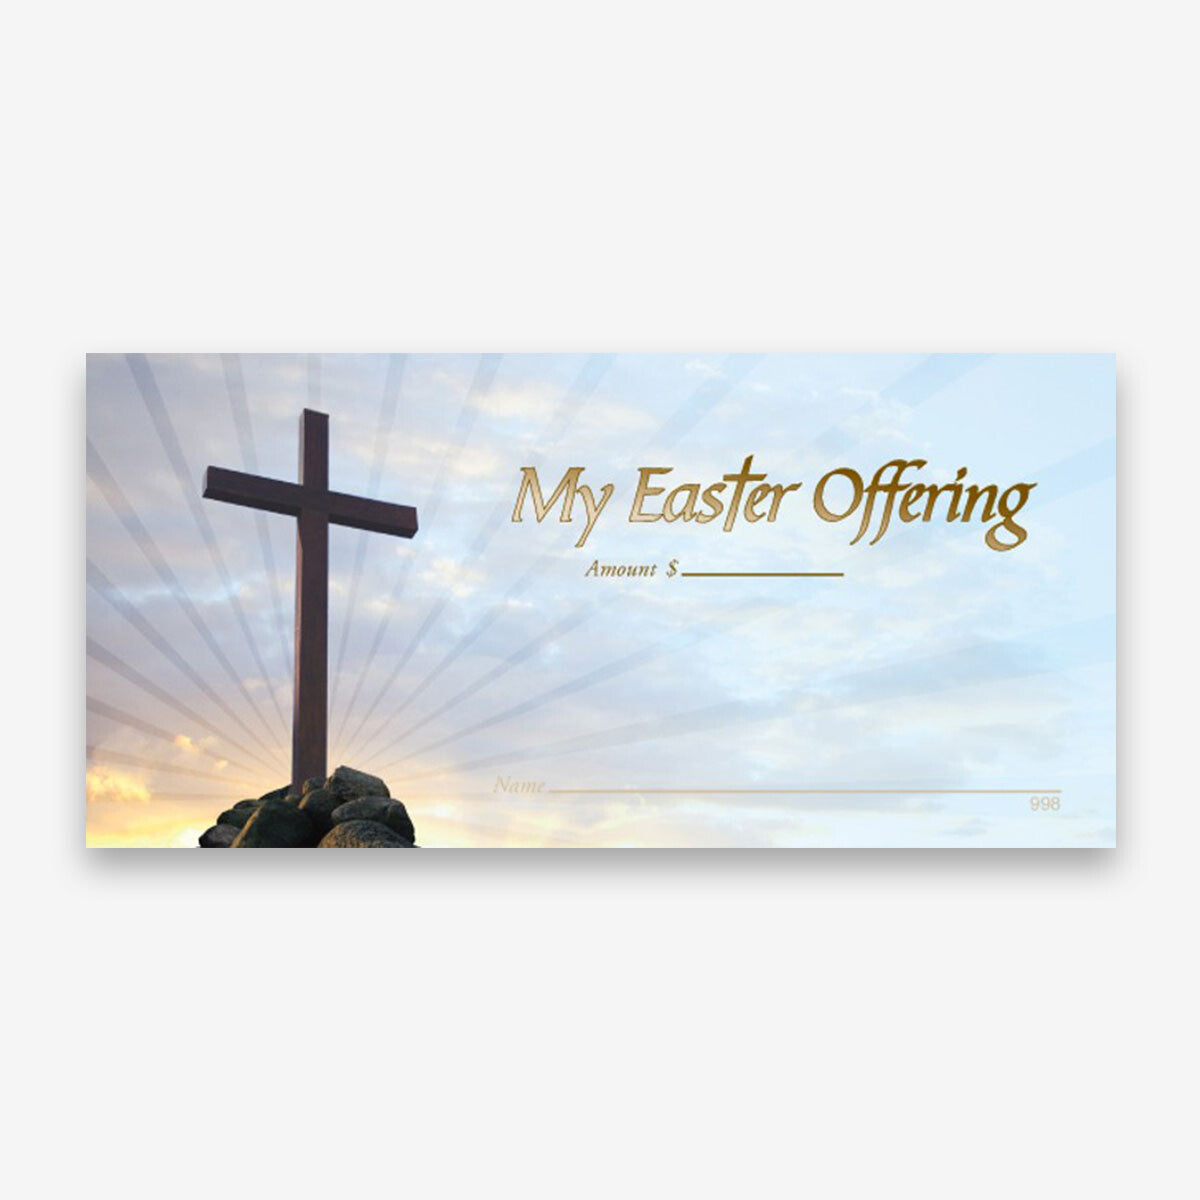 NCS National Church Solutions Premium Easter Offering Envelope